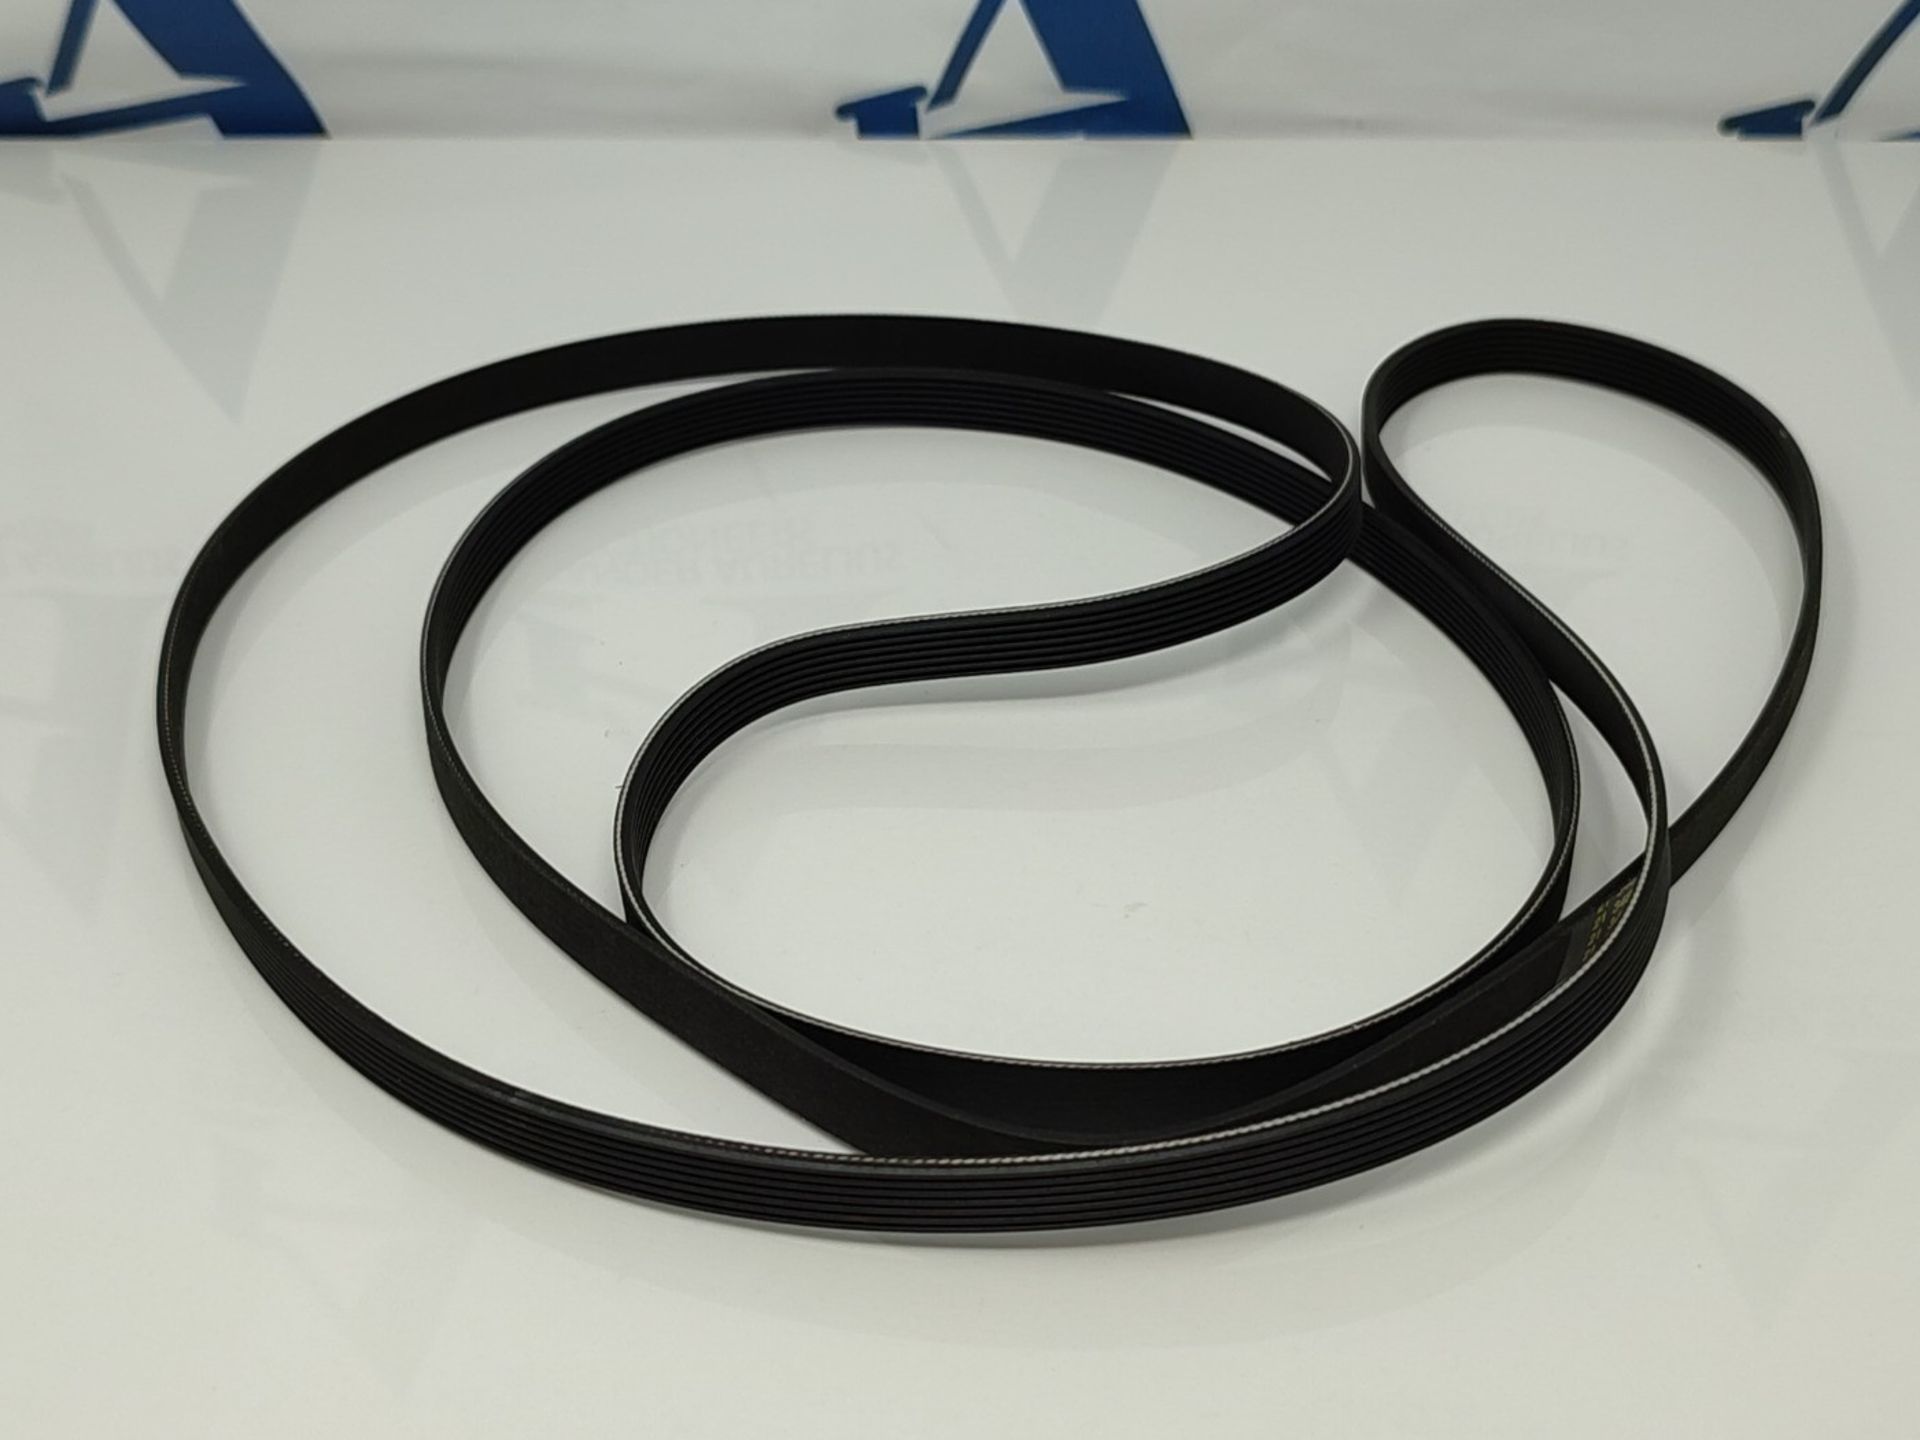 Lichtblau V-ribbed belt 1975H7 / 1975PH7 for tumble dryers, drive belt suitable for AE